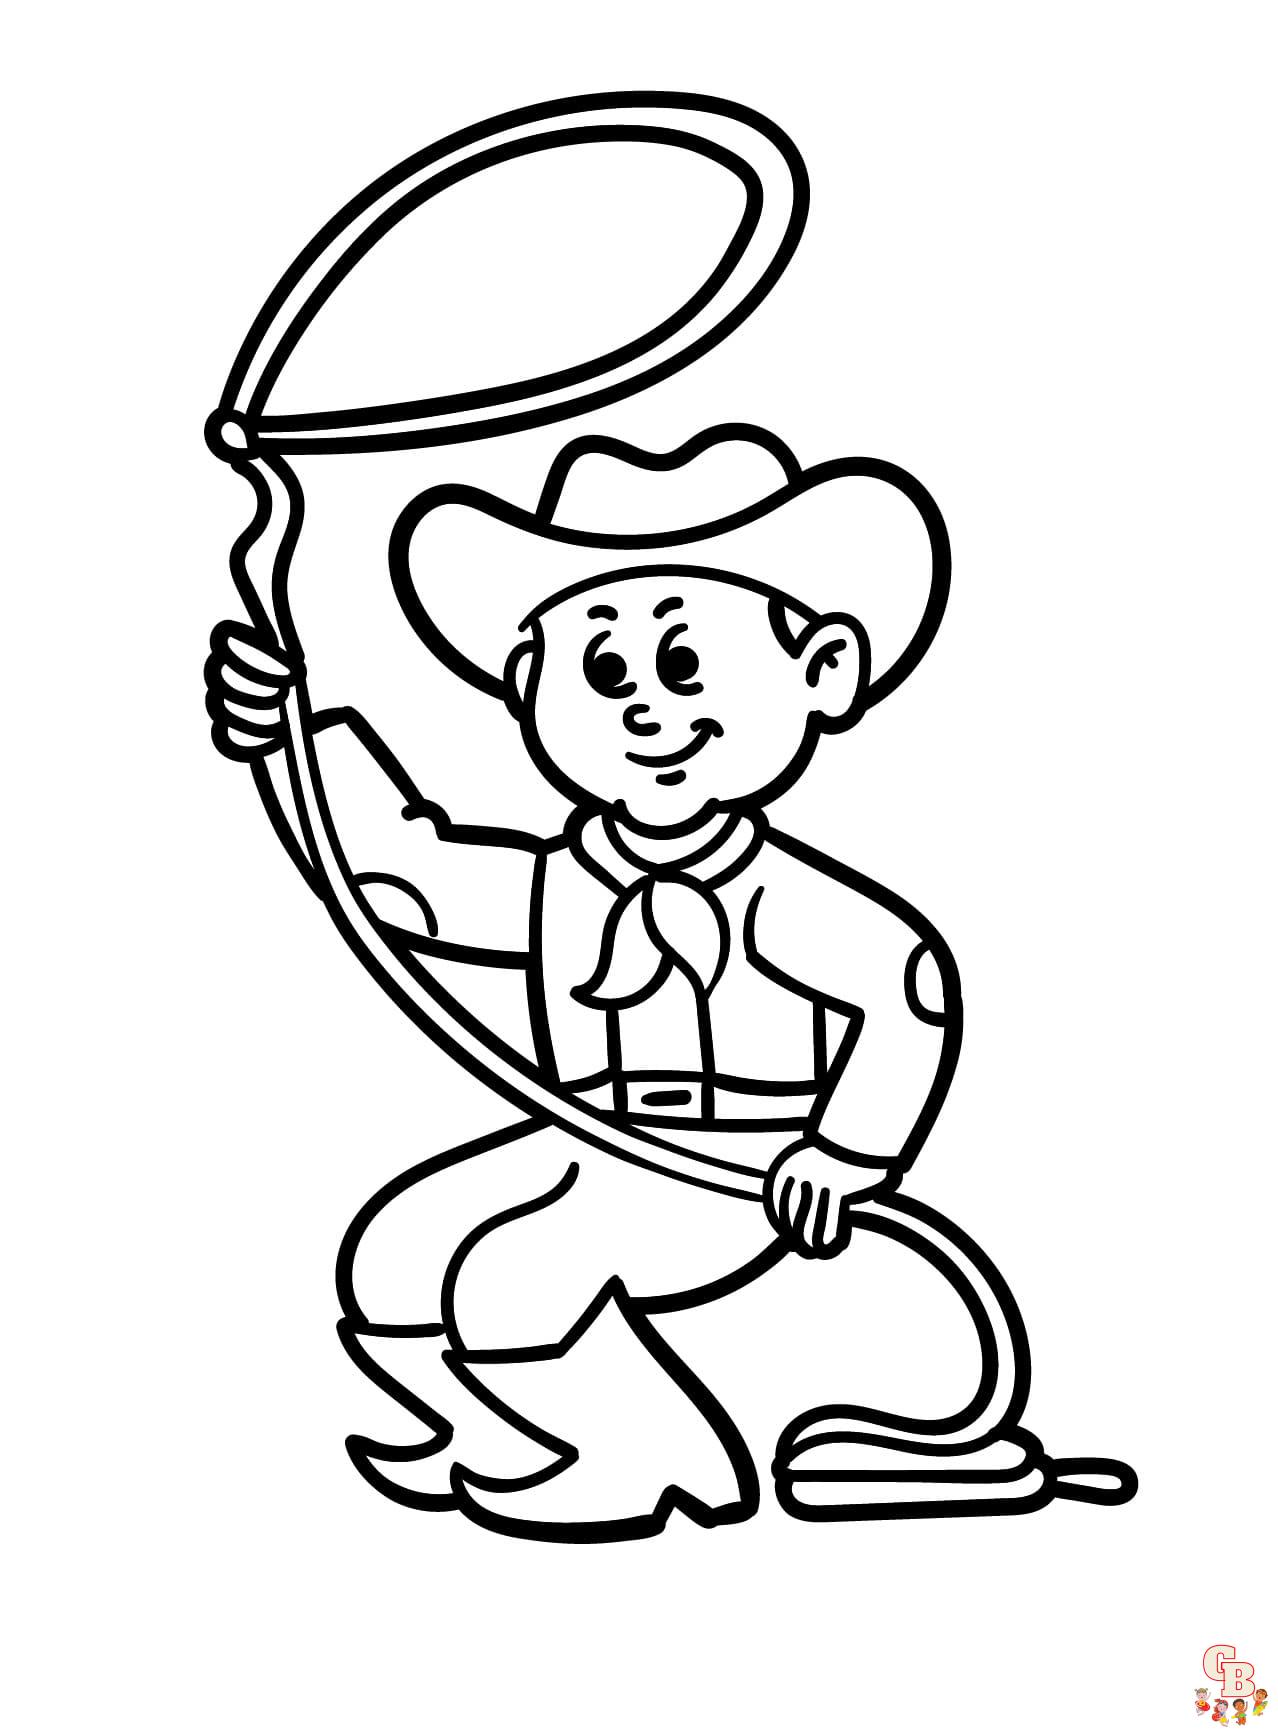 Western coloring pages to print